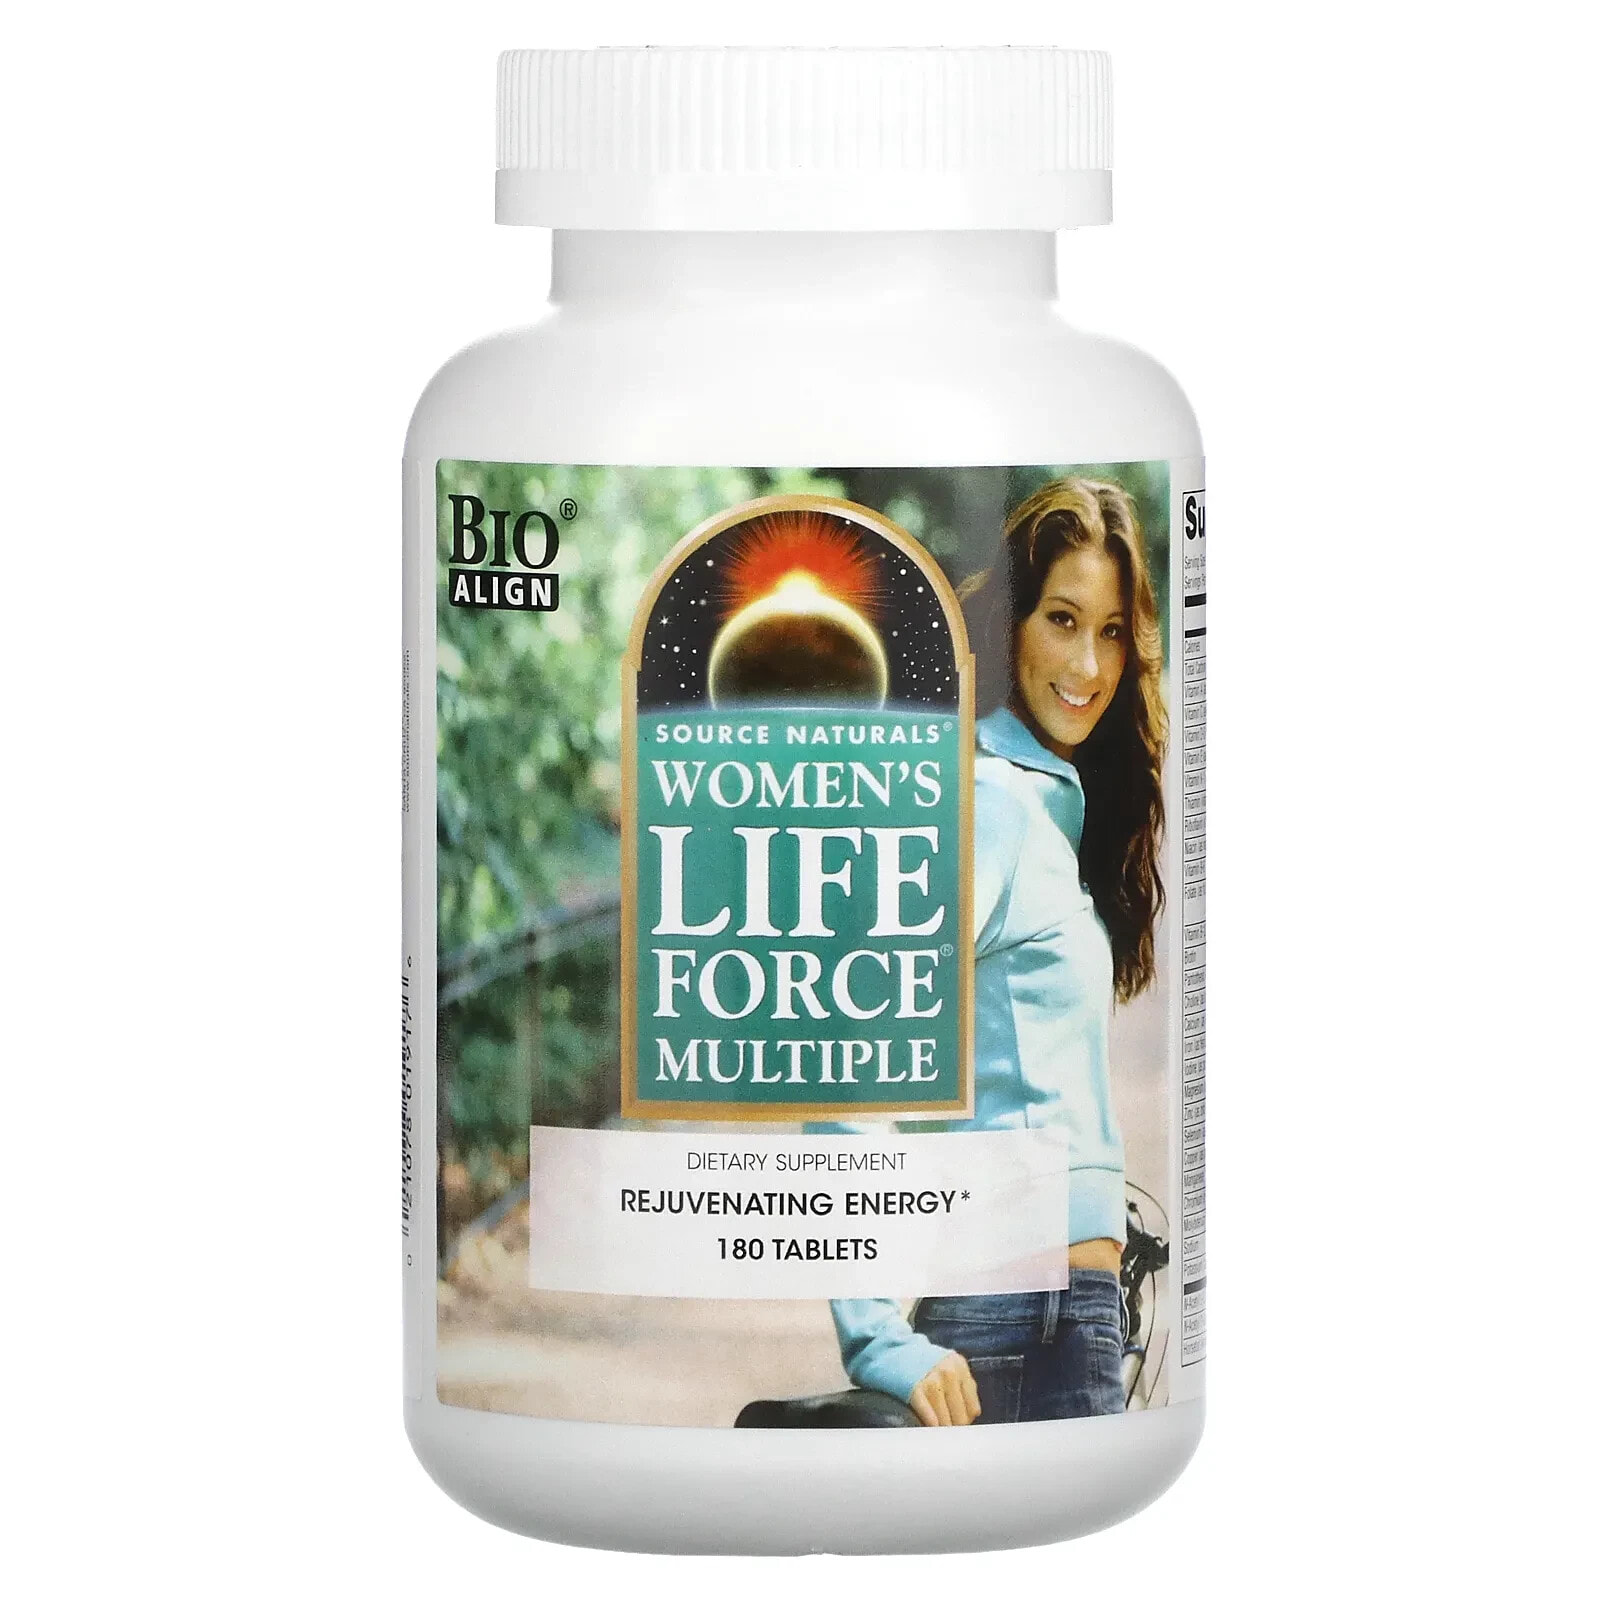 Women's Life Force Multiple, 180 Tablets